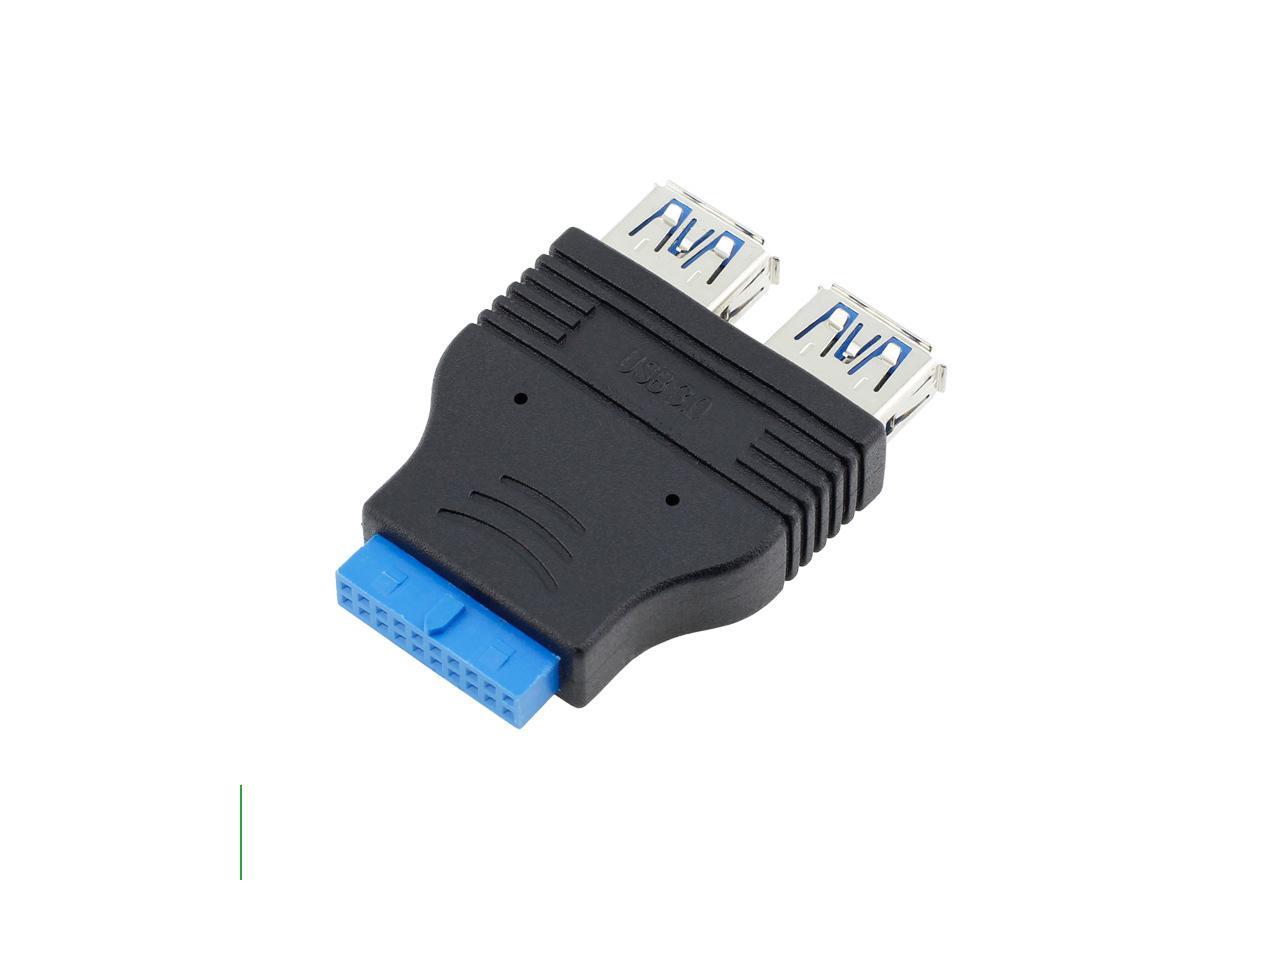 WDX 2 x USB 3.1 Type C Female Port Back Panel to MB 20Pin Header Connector Cable Adapter with Extension Cable PCI Slot Plate Bracket 